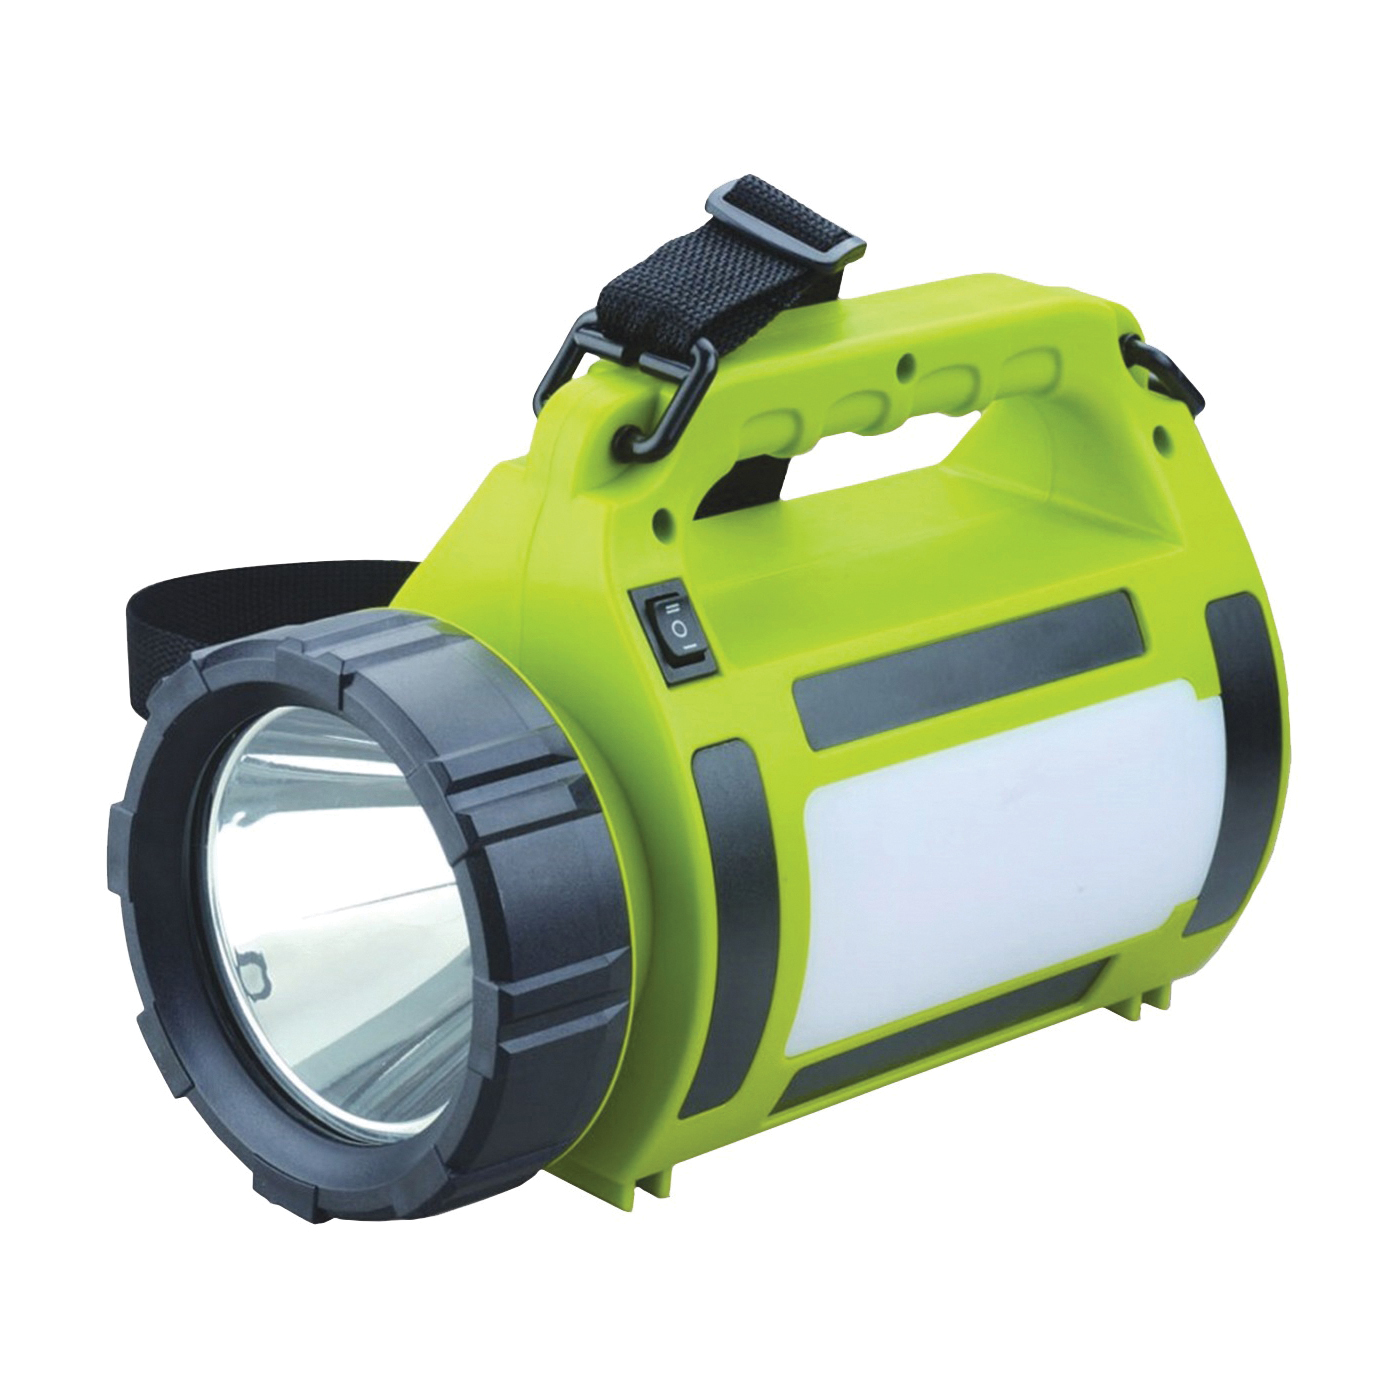 41-1081 Rechargeable USB Lantern, Lithium-Ion Battery, LED Lamp, 700 Lumens Lumens, Green